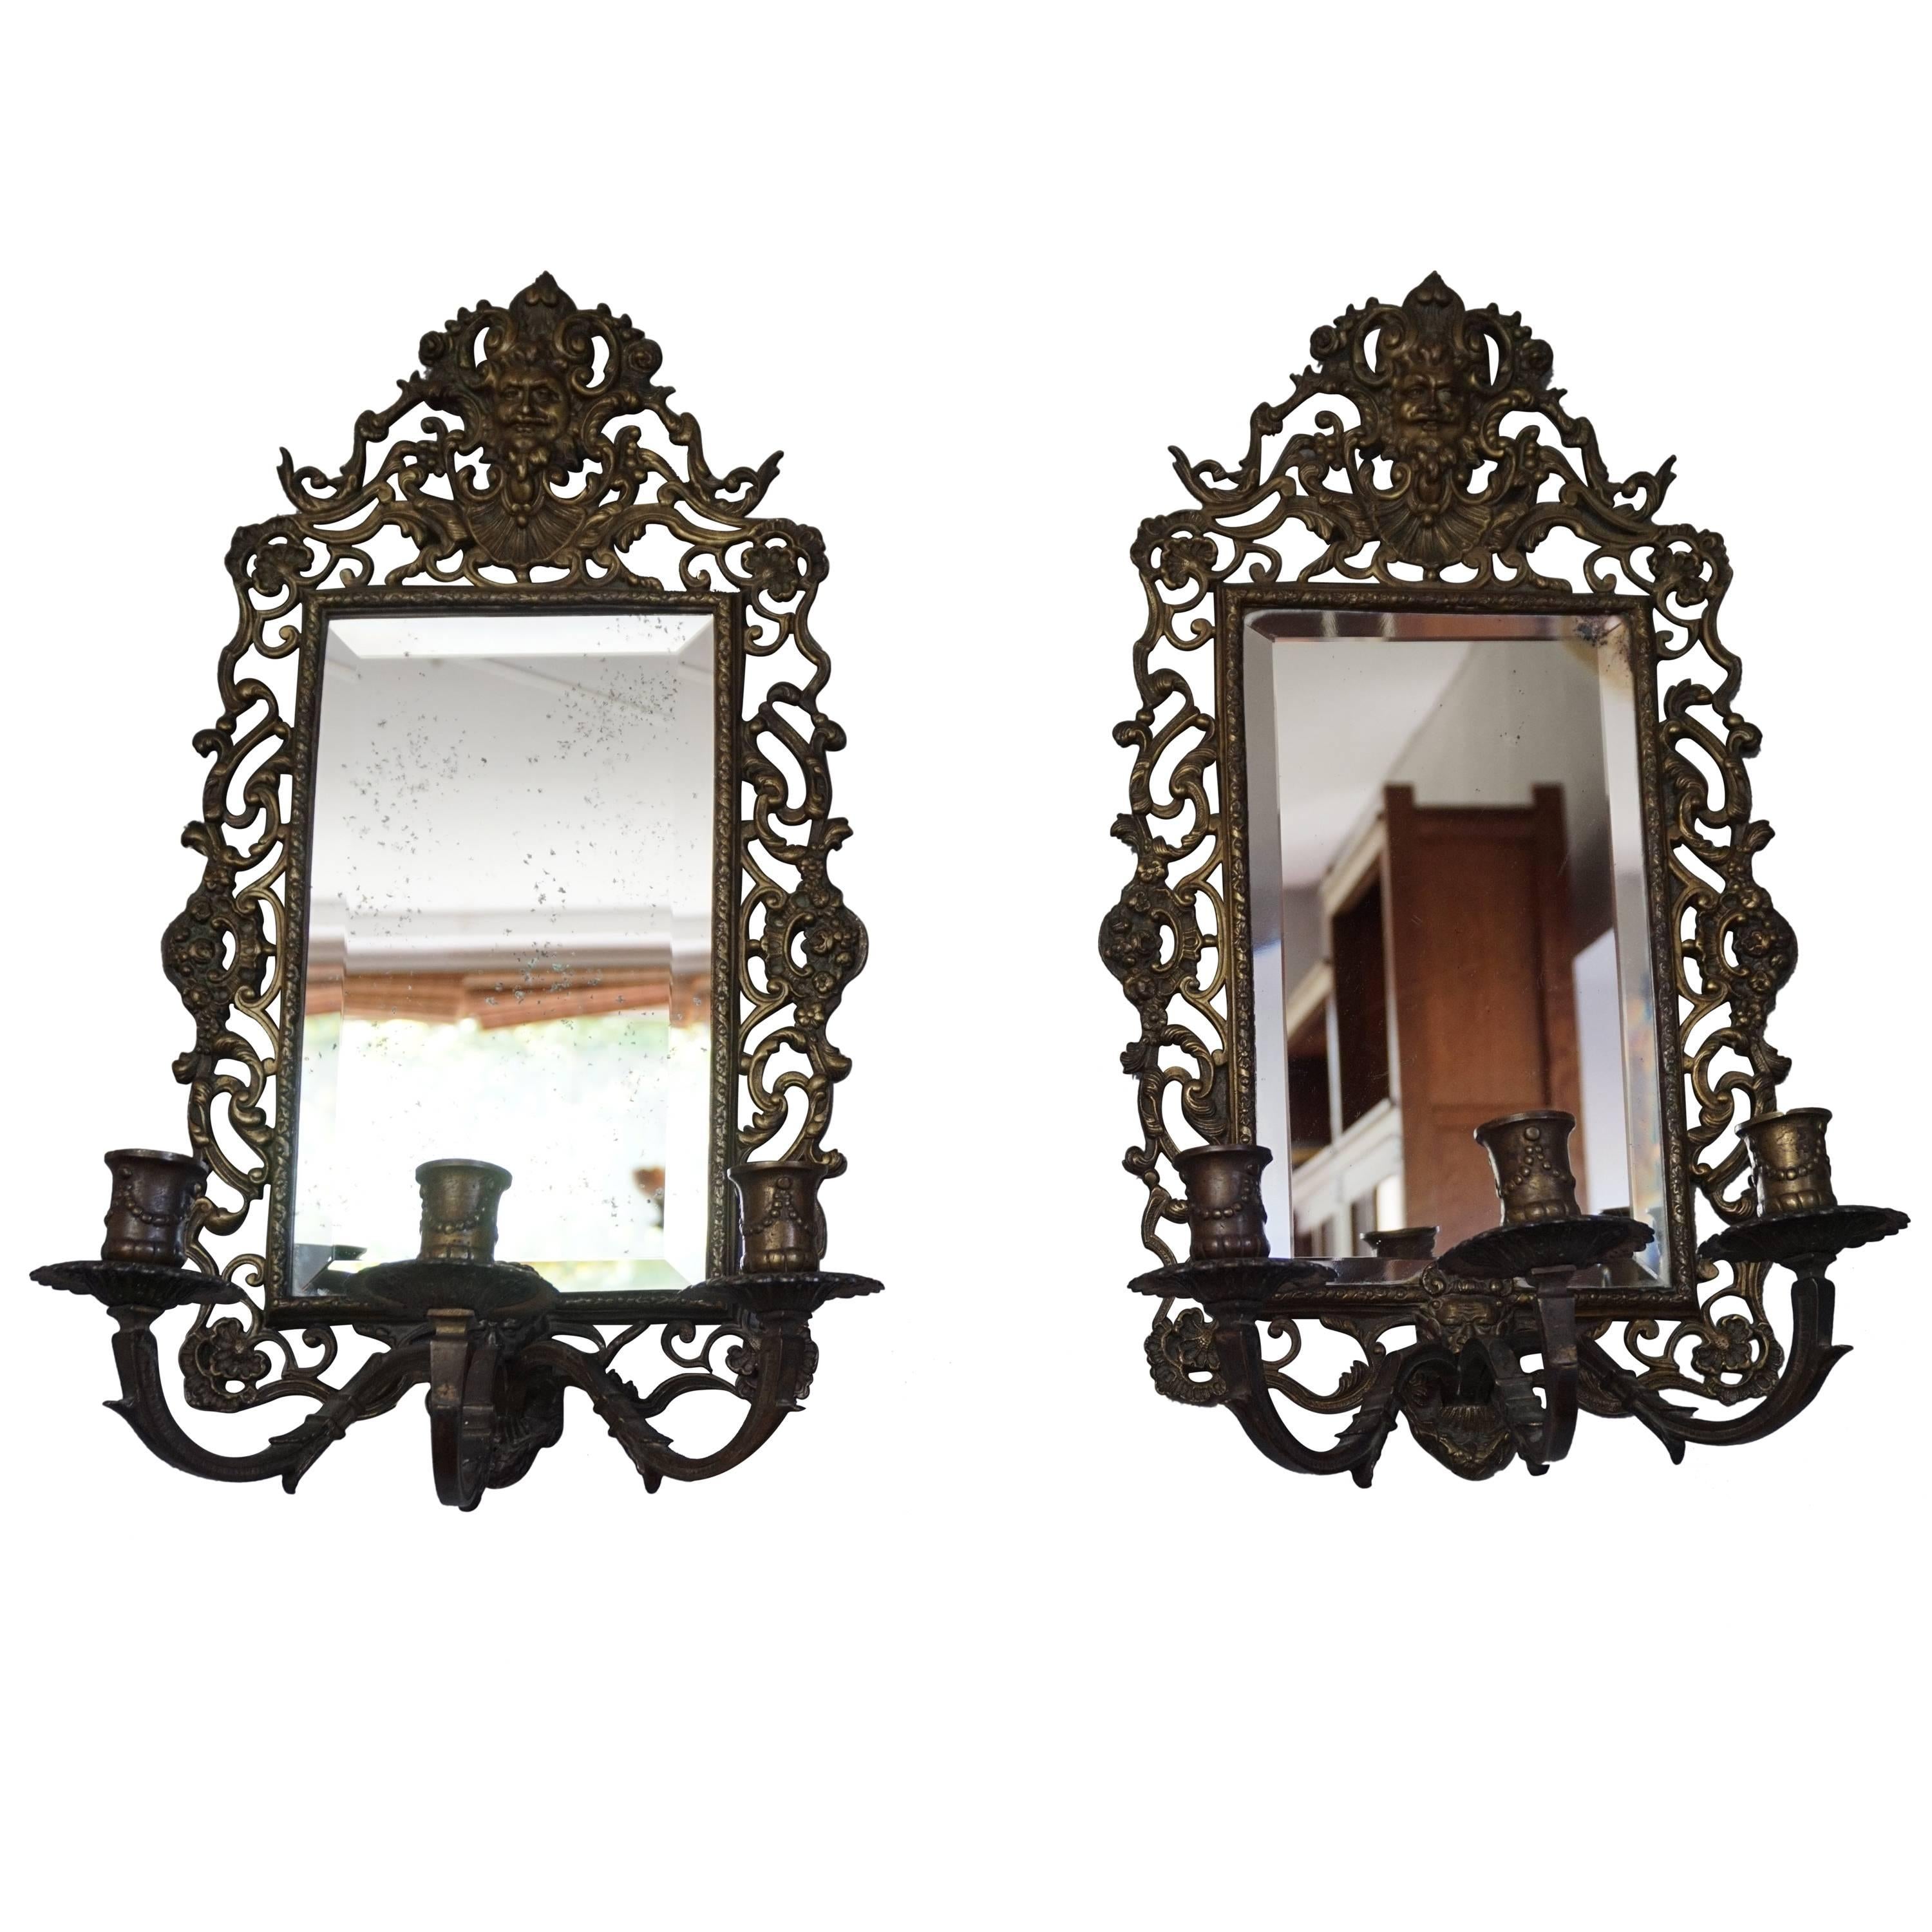 Pair of Renaissance Revival Bronze & Beveled Mirror Wall Sconces and Candelabras